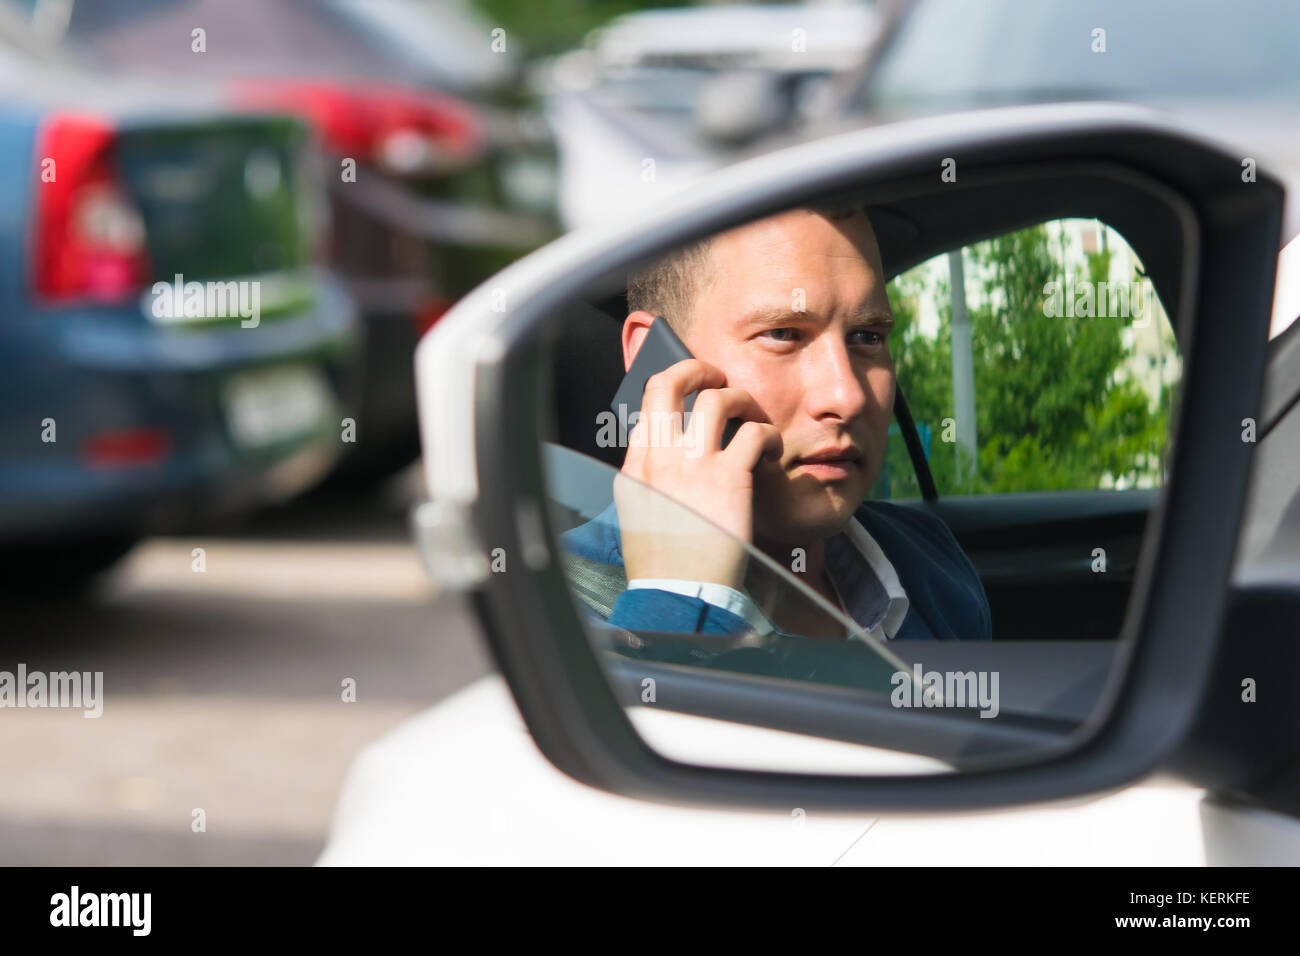 Young man in a jacket talking on the phone, reflection in the mirror of a car Stock Photo